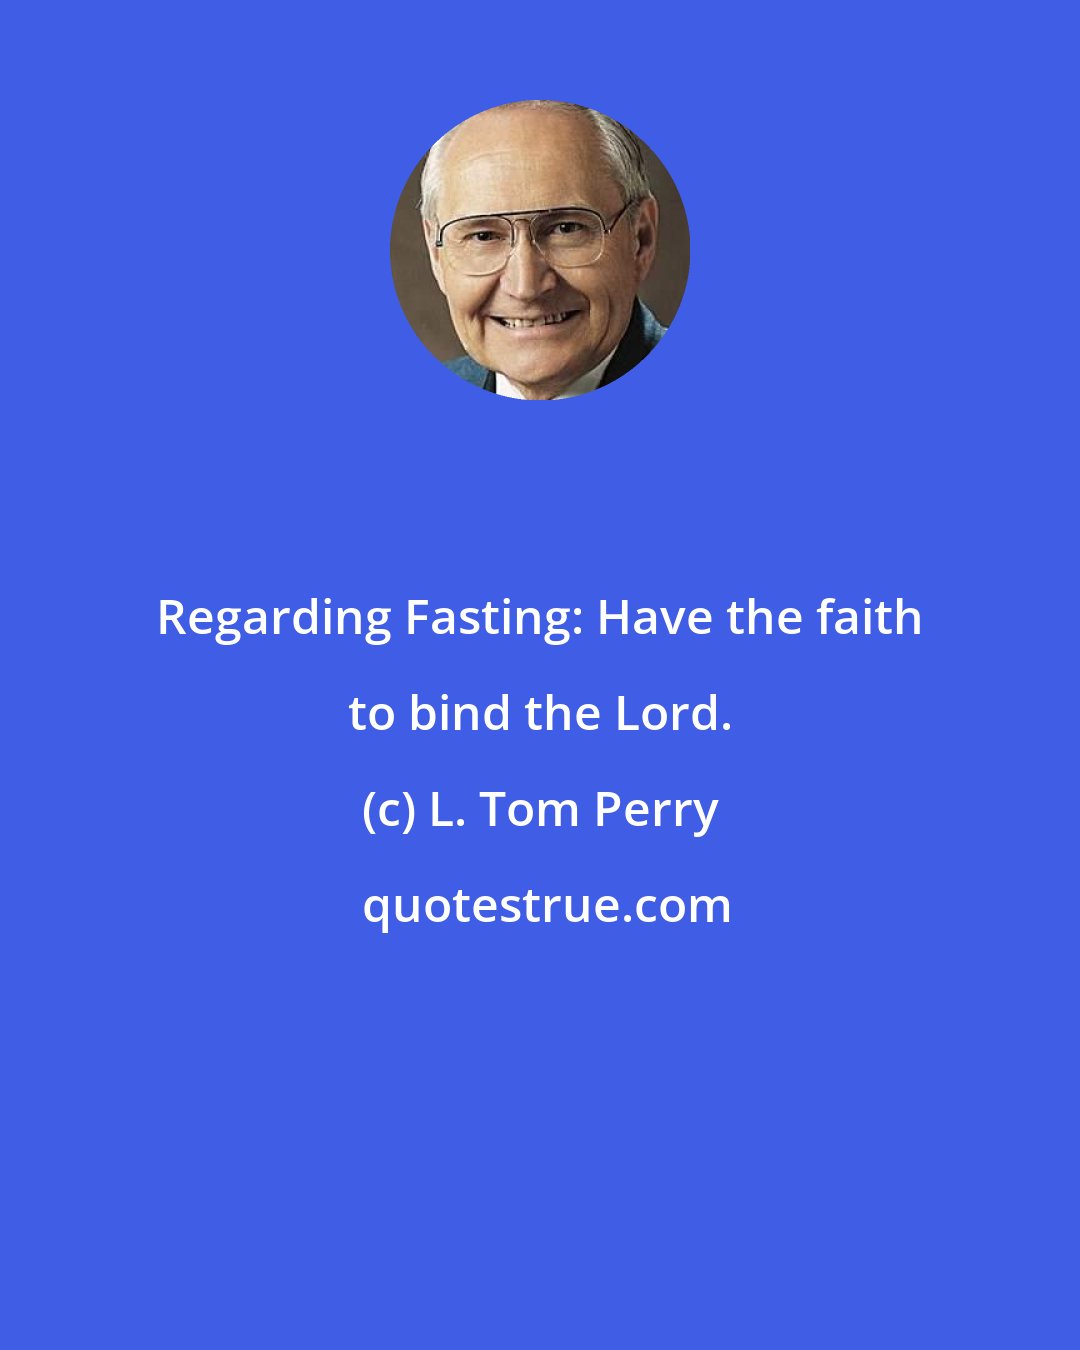 L. Tom Perry: Regarding Fasting: Have the faith to bind the Lord.